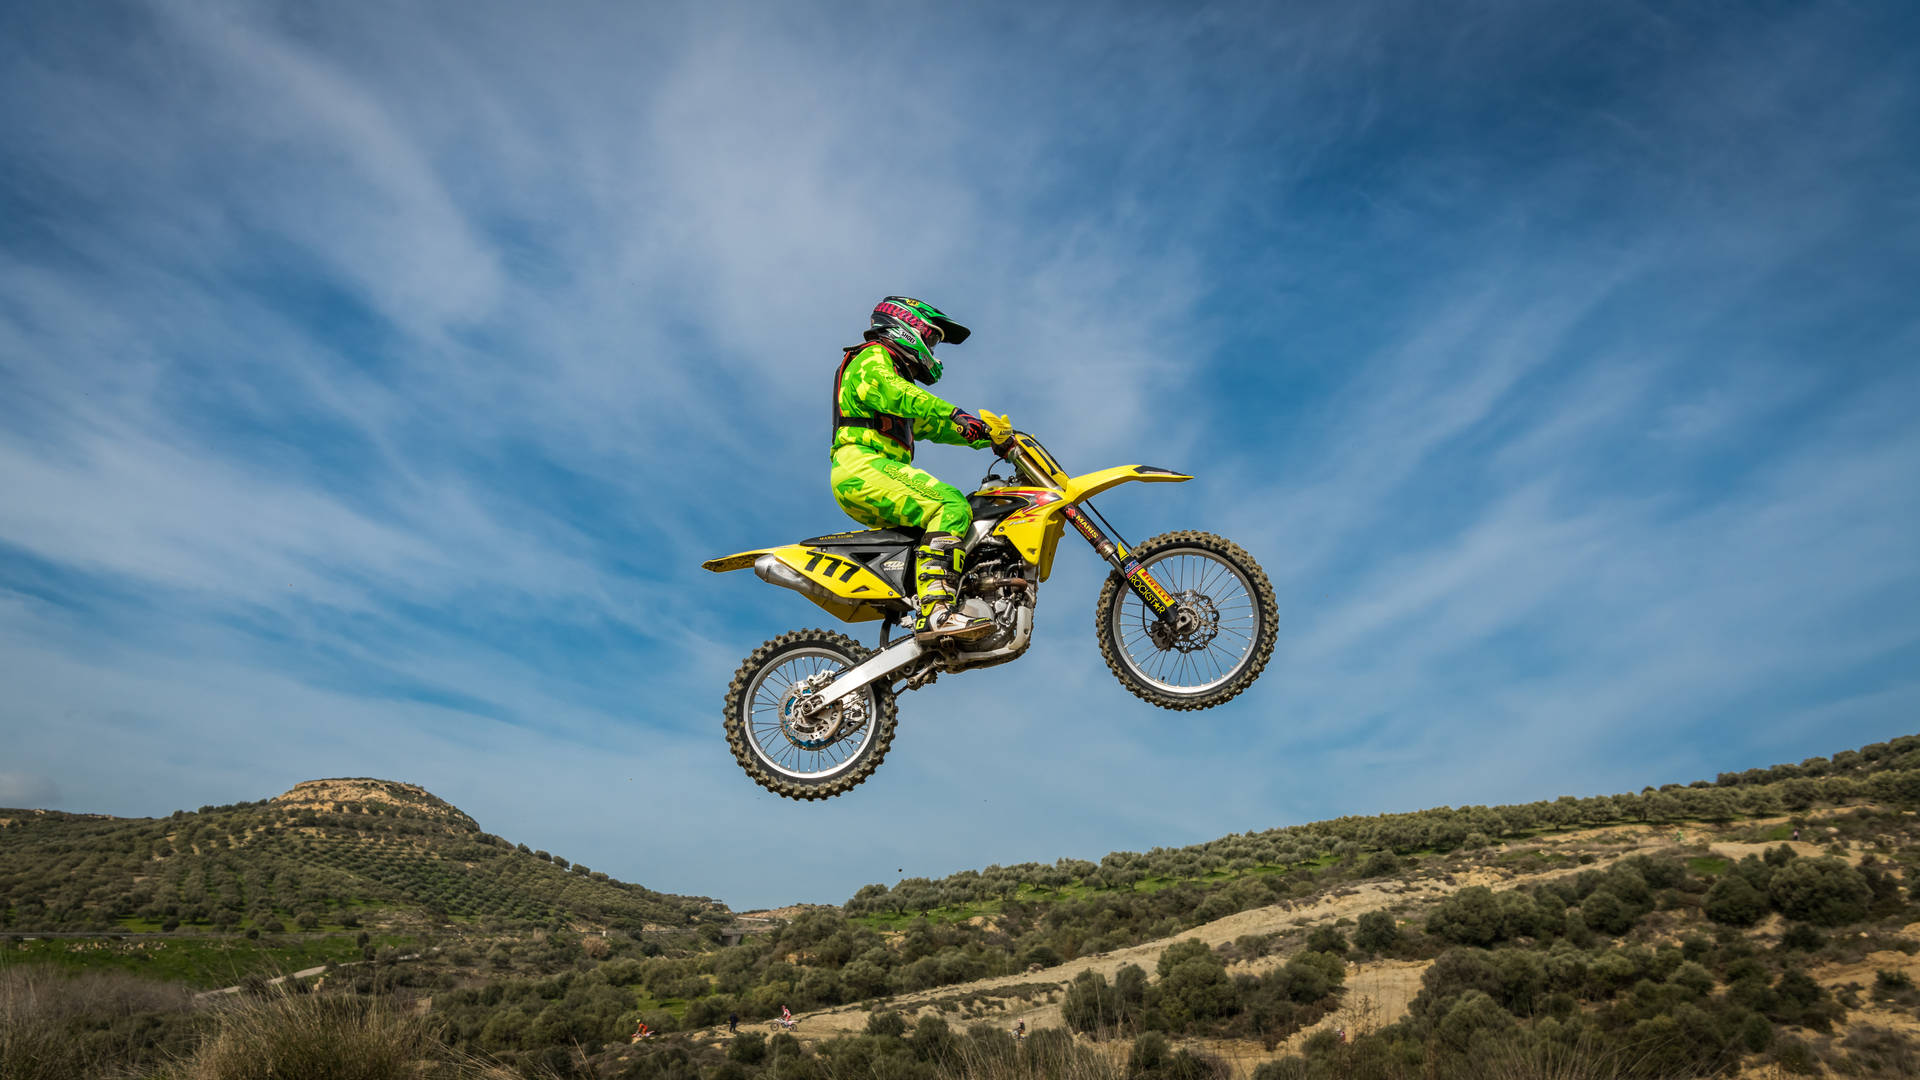 Dirtbike Mid-air Background